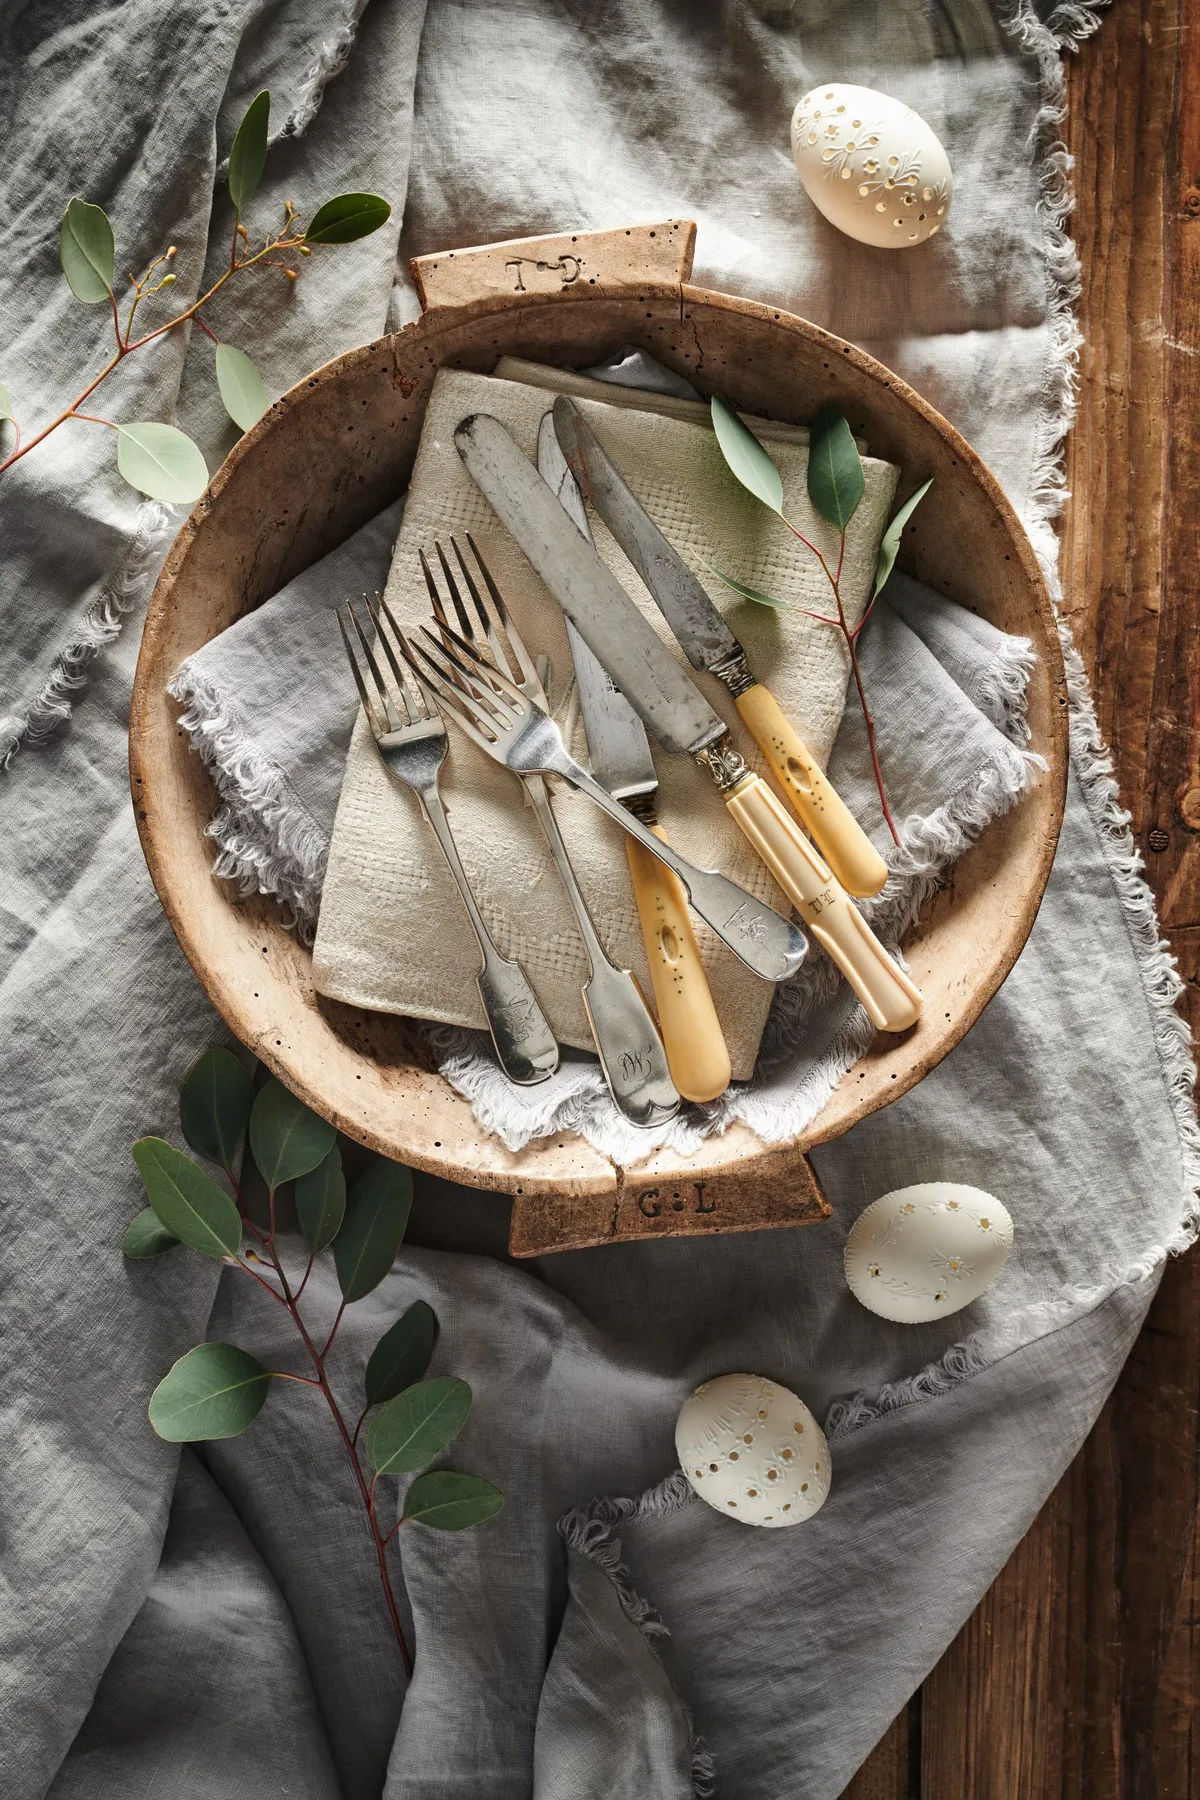 The natural textures of wood and linen are a happy pairing. Choose monogrammed cutlery and sprigs of foliage for a pleasing lunch table. For an Easter hit, add eggs, either daintily decorated or plain.